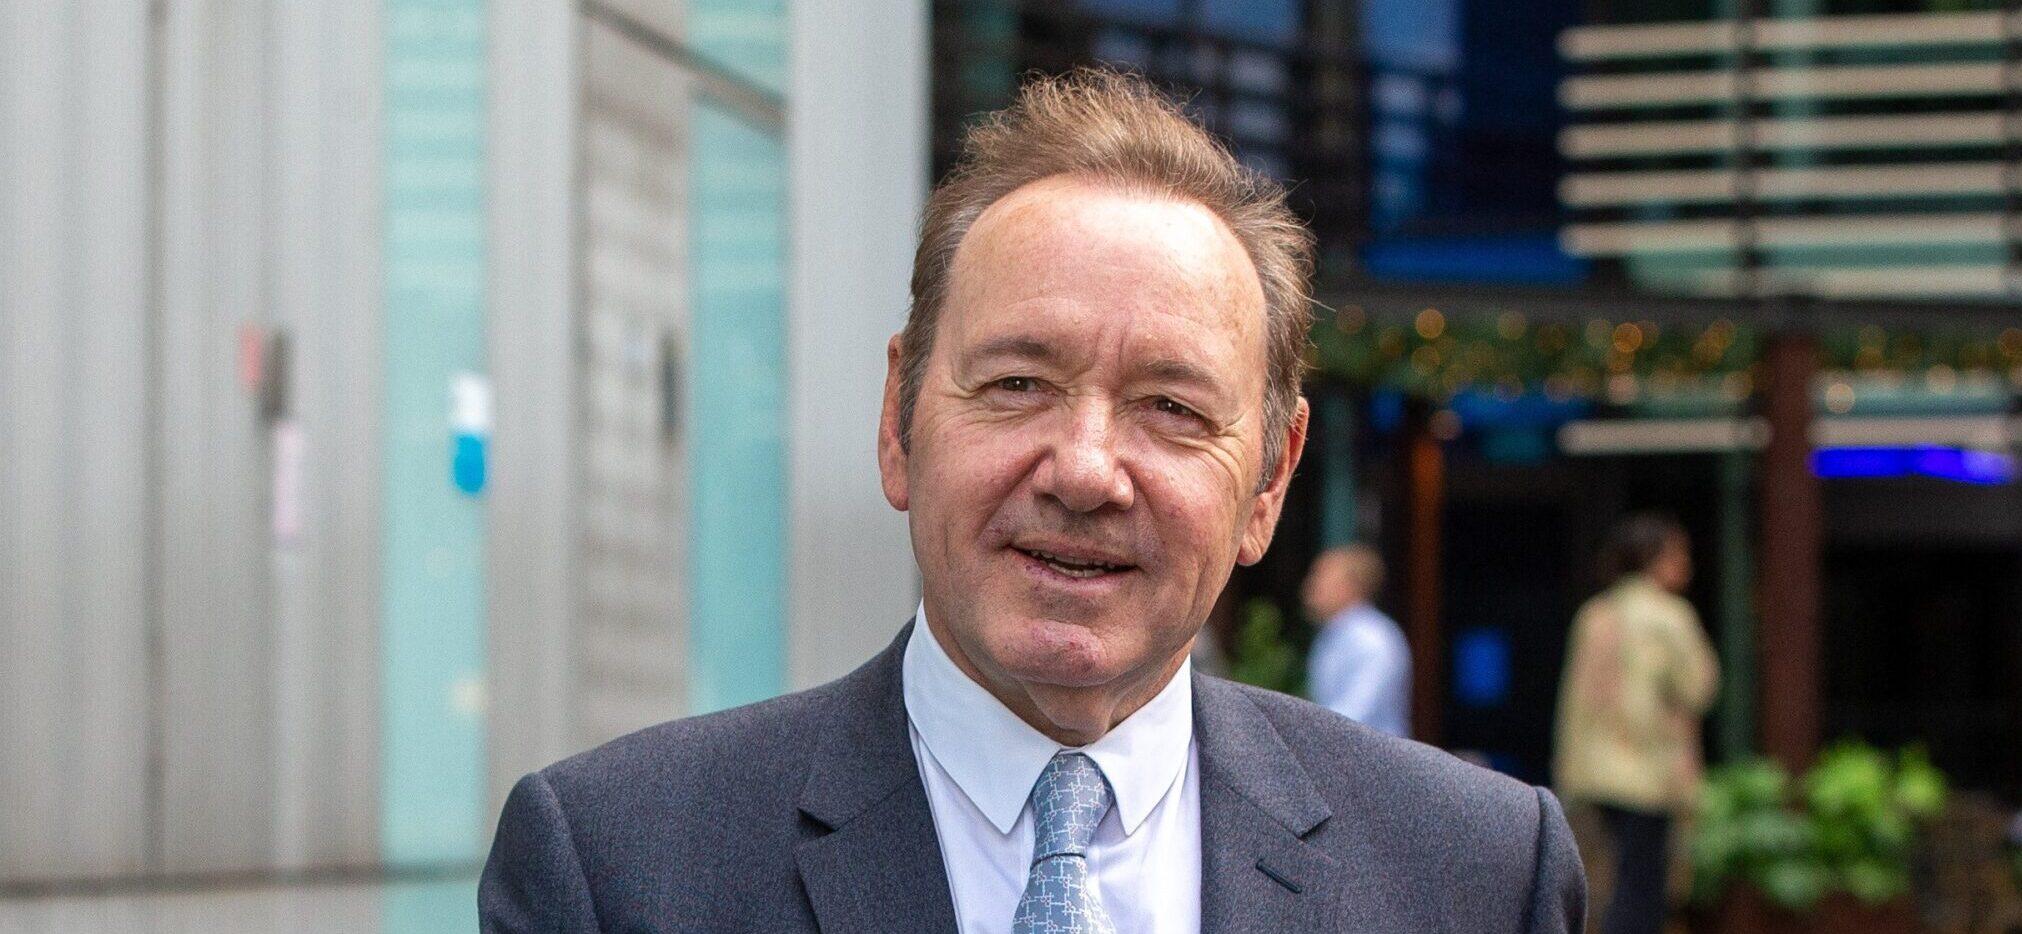 Kevin Spacey Rushed To Hospital After His Entire Left Arm Went ‘Numb For About Eight Seconds’